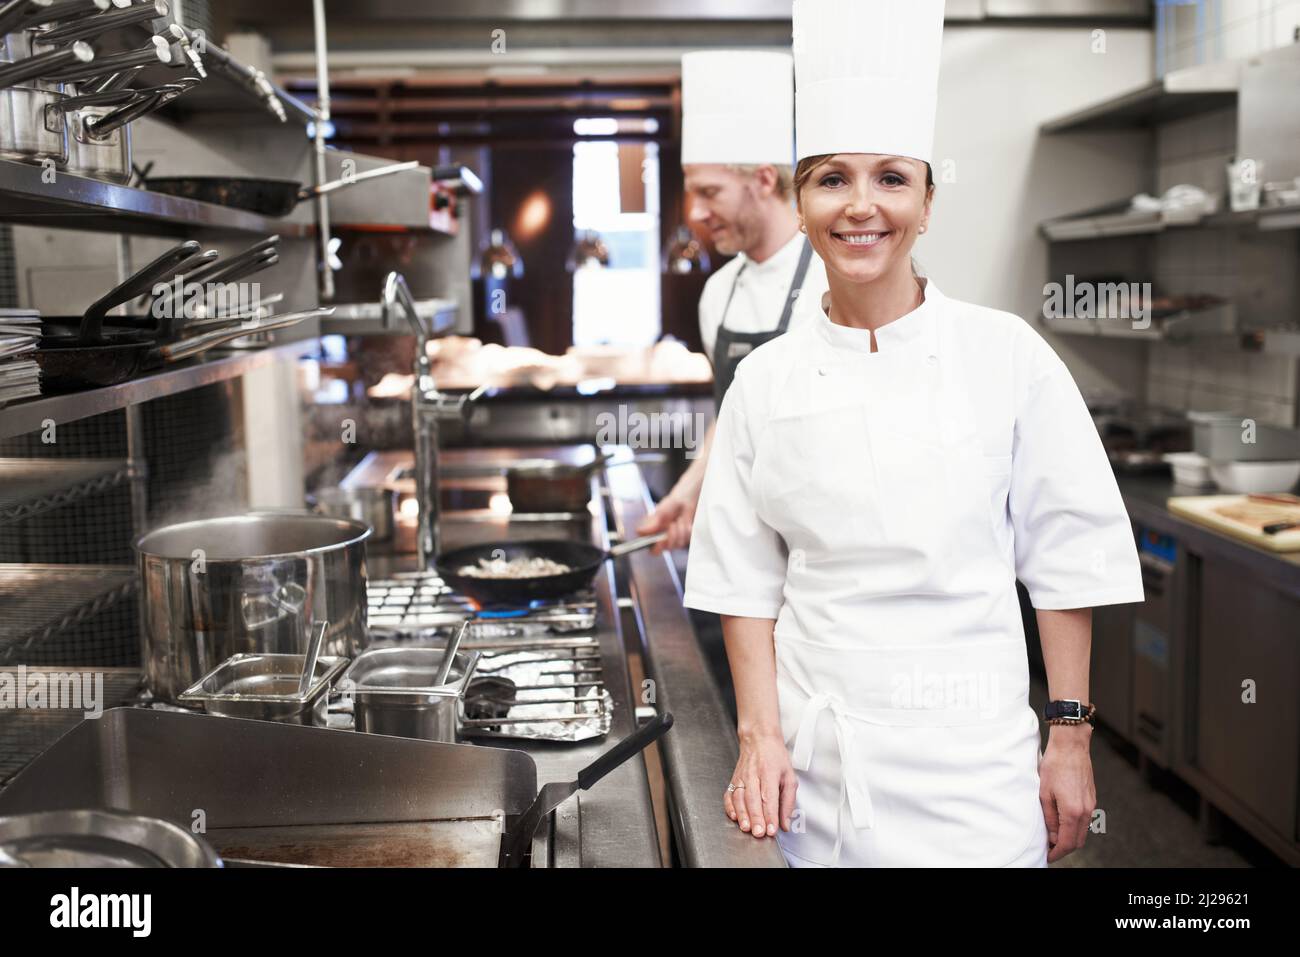 Shes a master chef. Portrait of a chef in a professional kitchen. Stock Photo